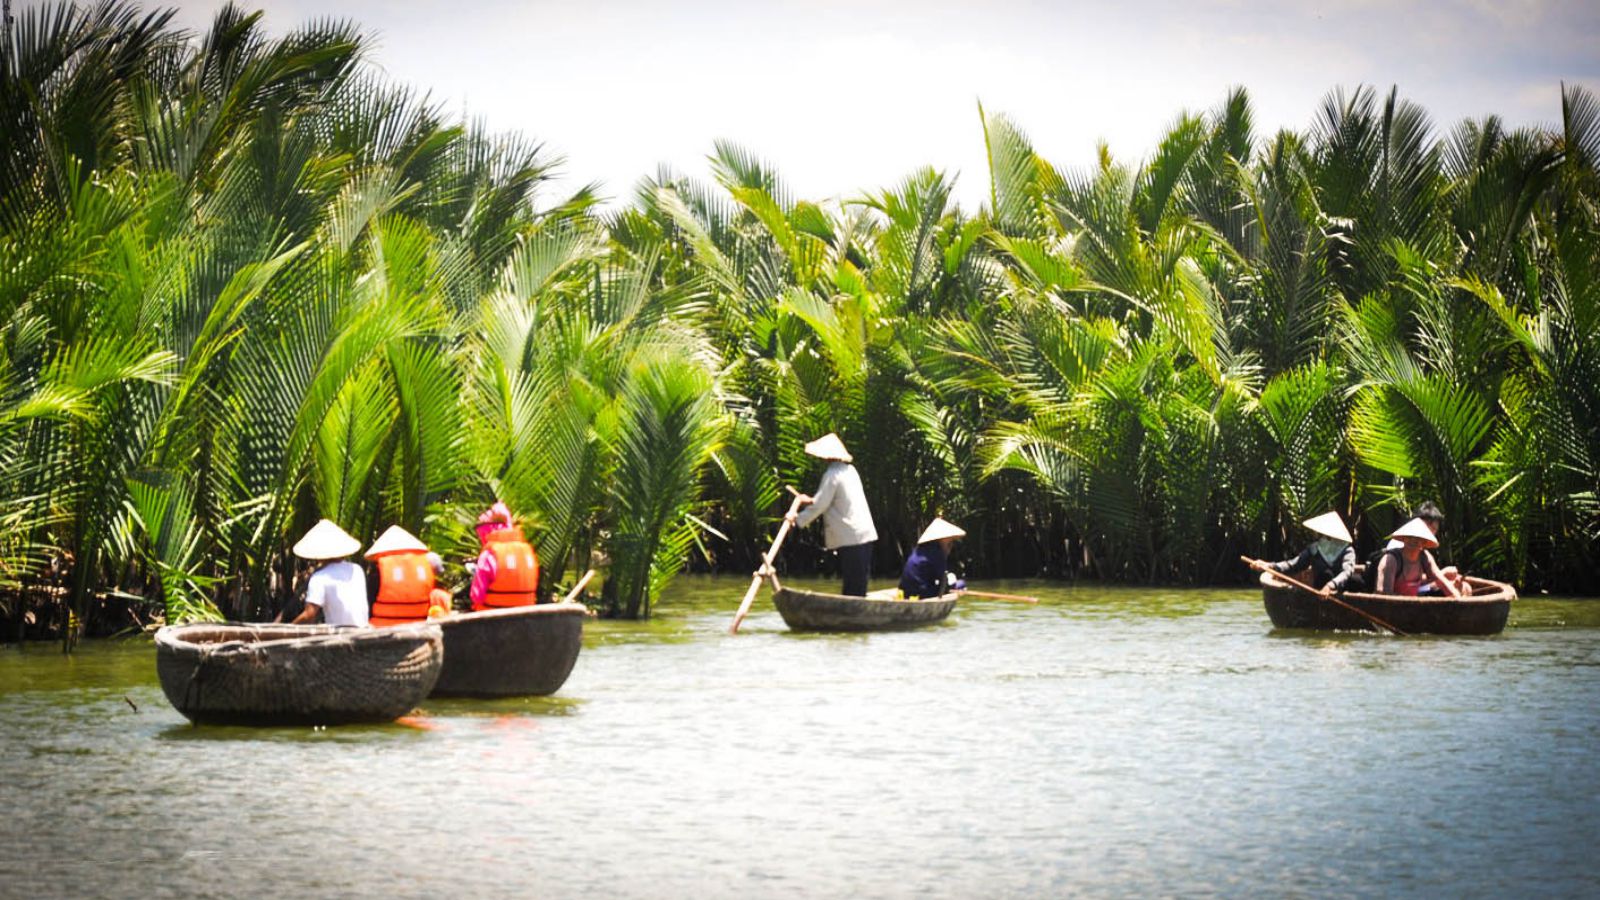 Reasons to Rent a Coconut Boat in Vietnam